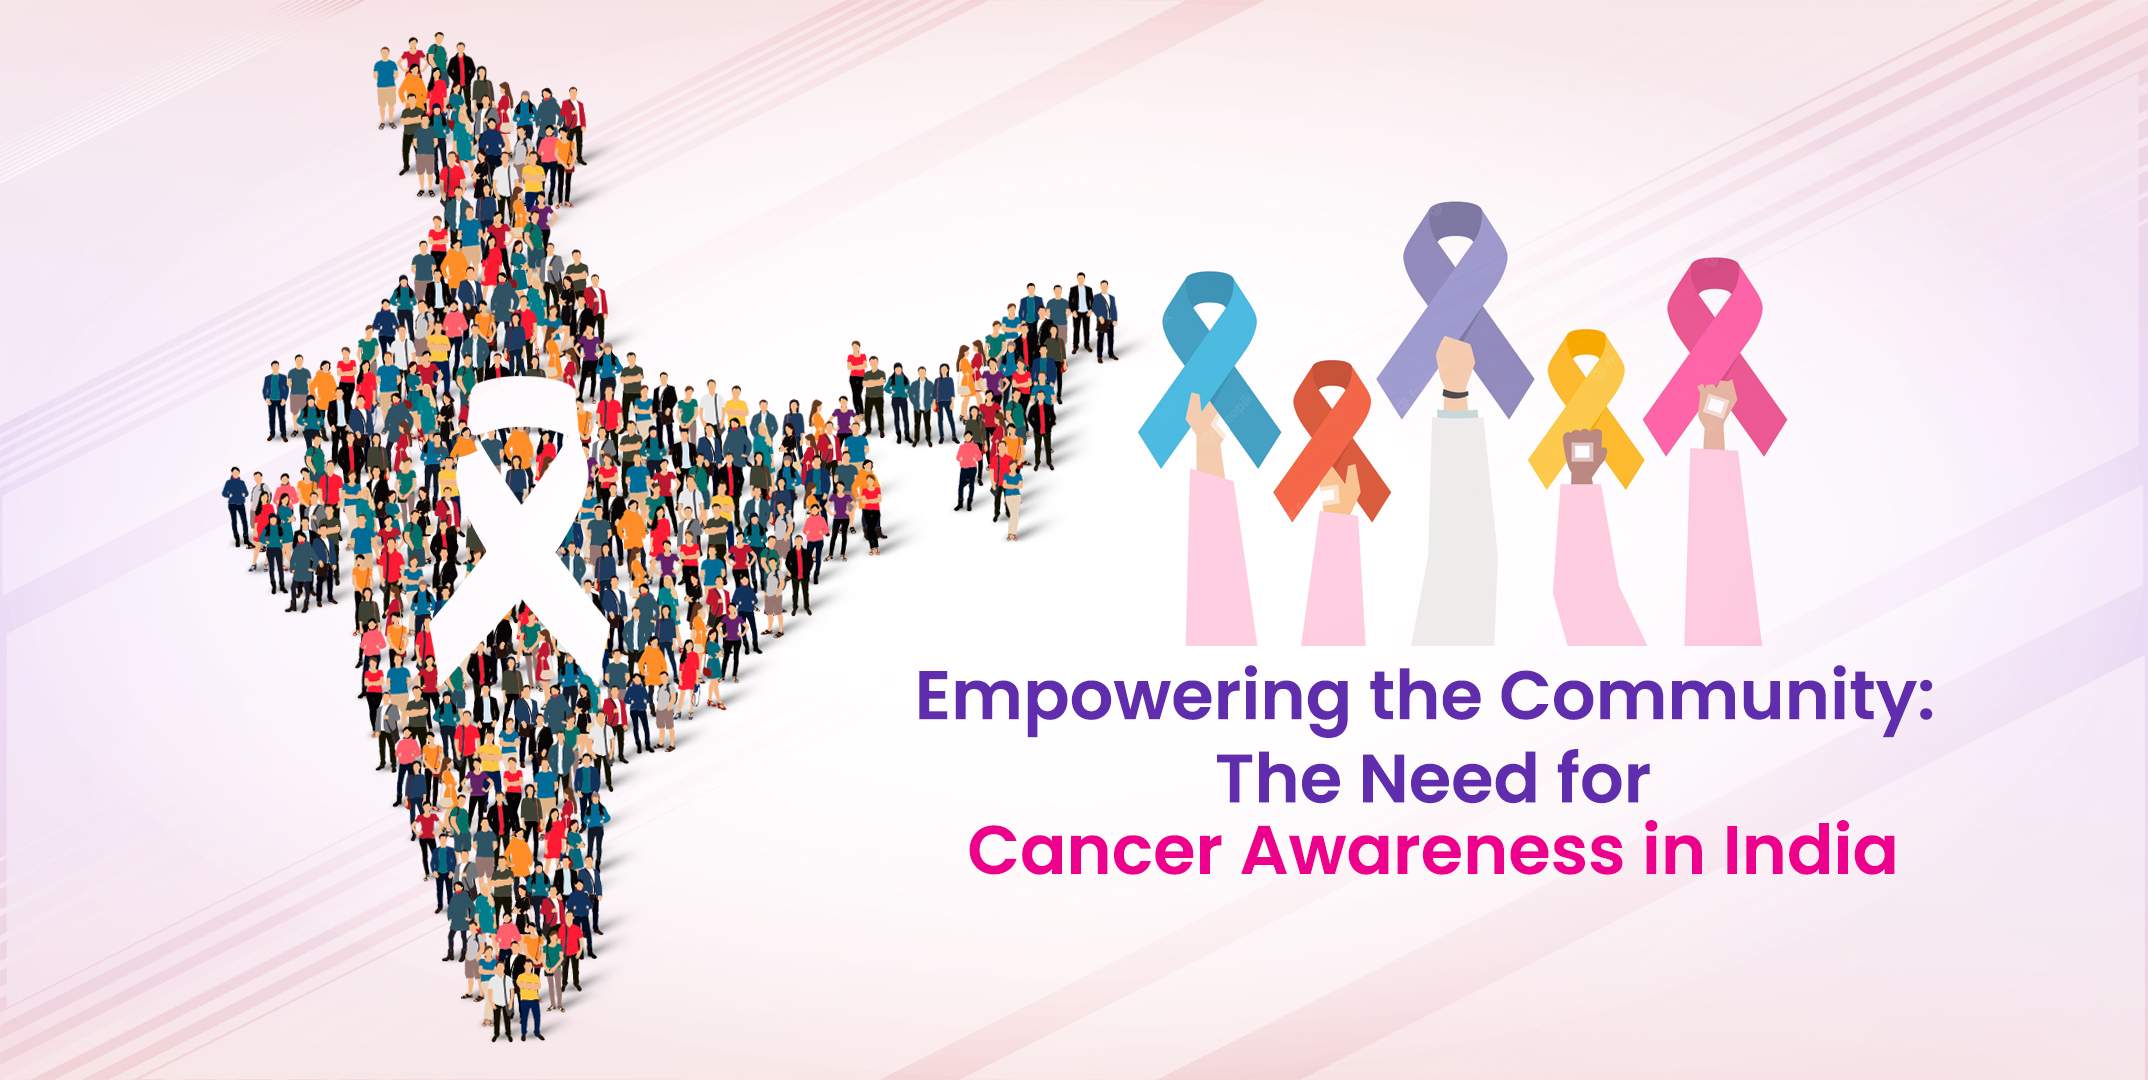 Cancer Awareness in India